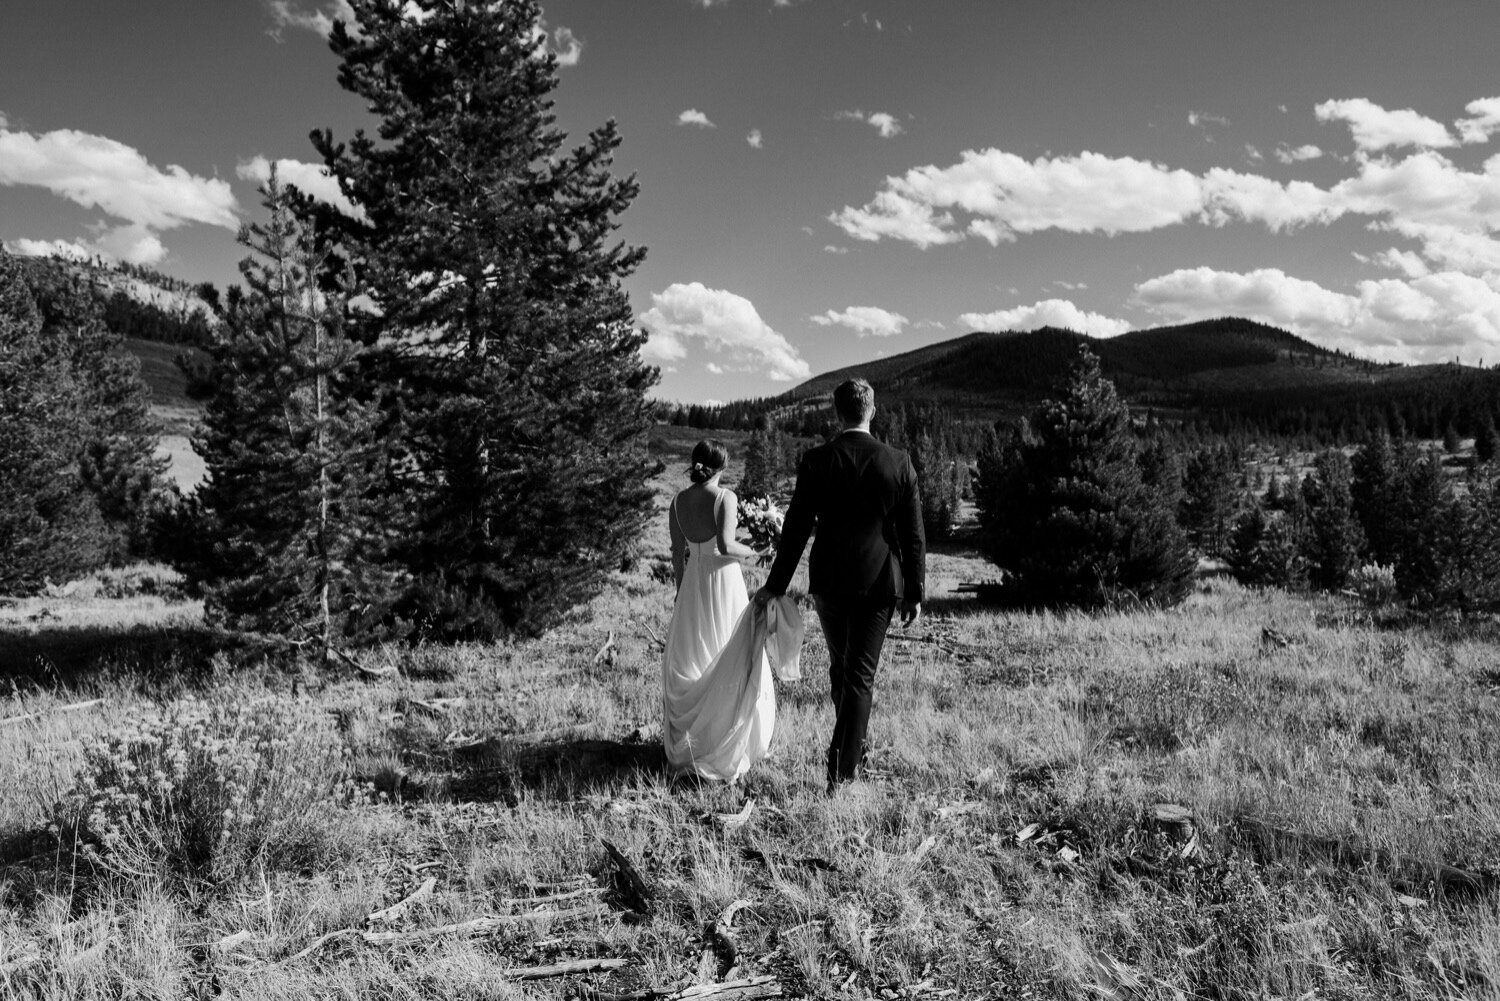  Bride and groom, Windy Point Campground Wedding Colorado, Dillon Colorado Wedding, Colorado mountain wedding, Dillon Colorado Wedding Photographer, Colorado Wedding Photographer, Colorado mountain wedding venues, Colorado campground wedding venues, 